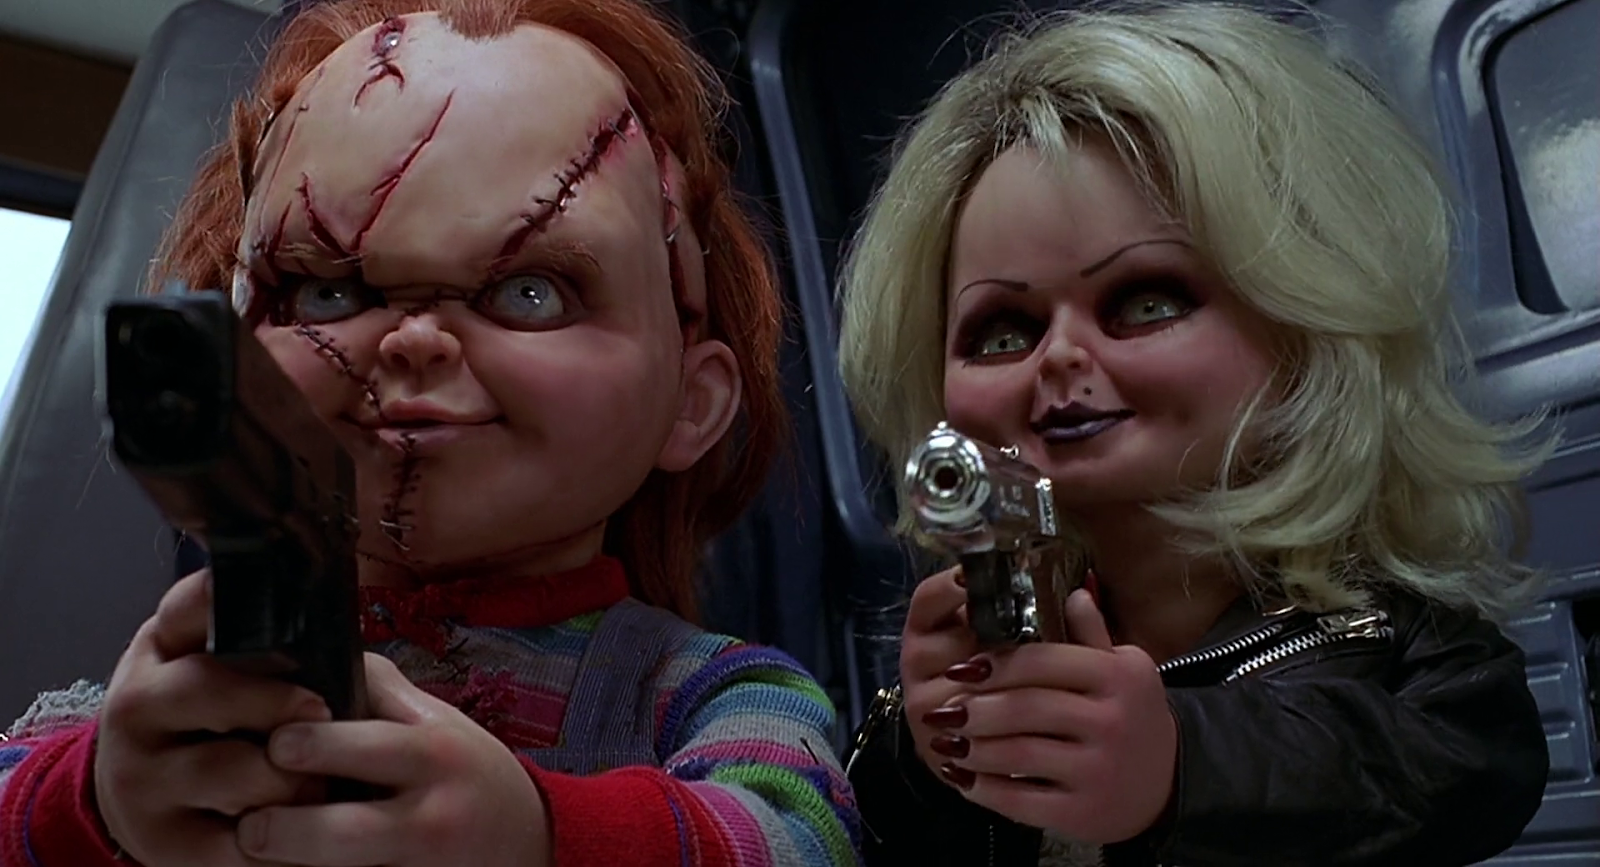 Jesse and Jade suck, but Bride of Chucky is a lot of fun. 